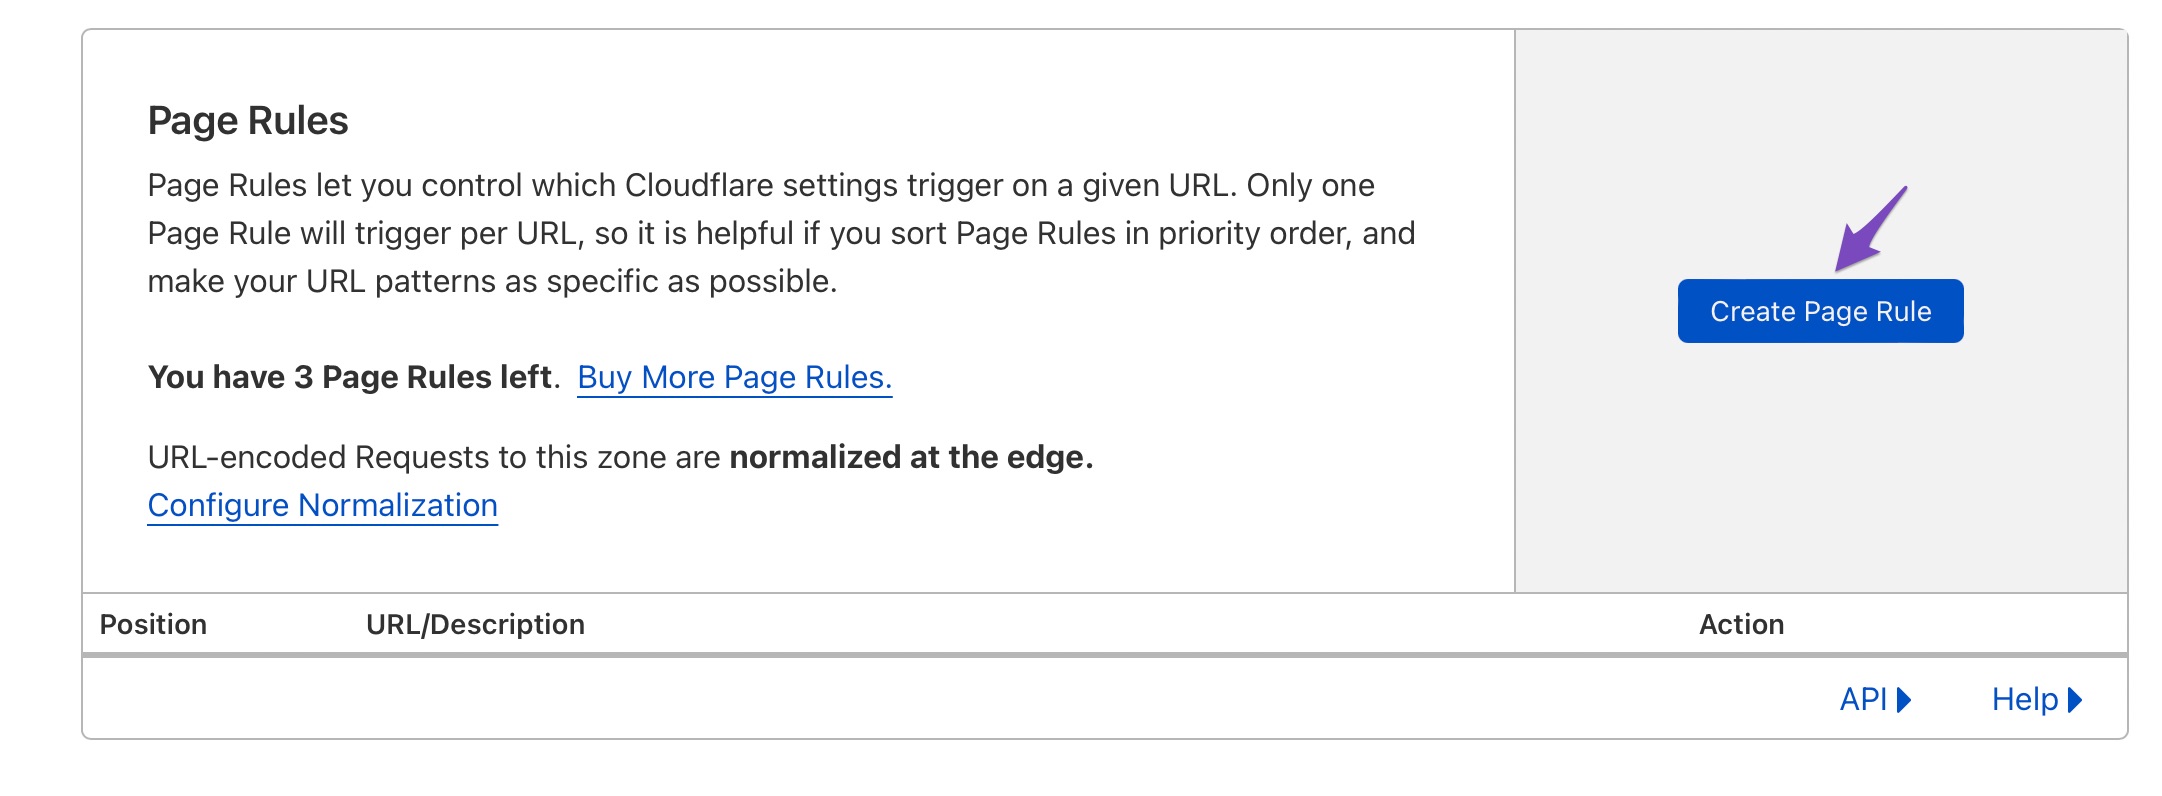 Create Page Rule